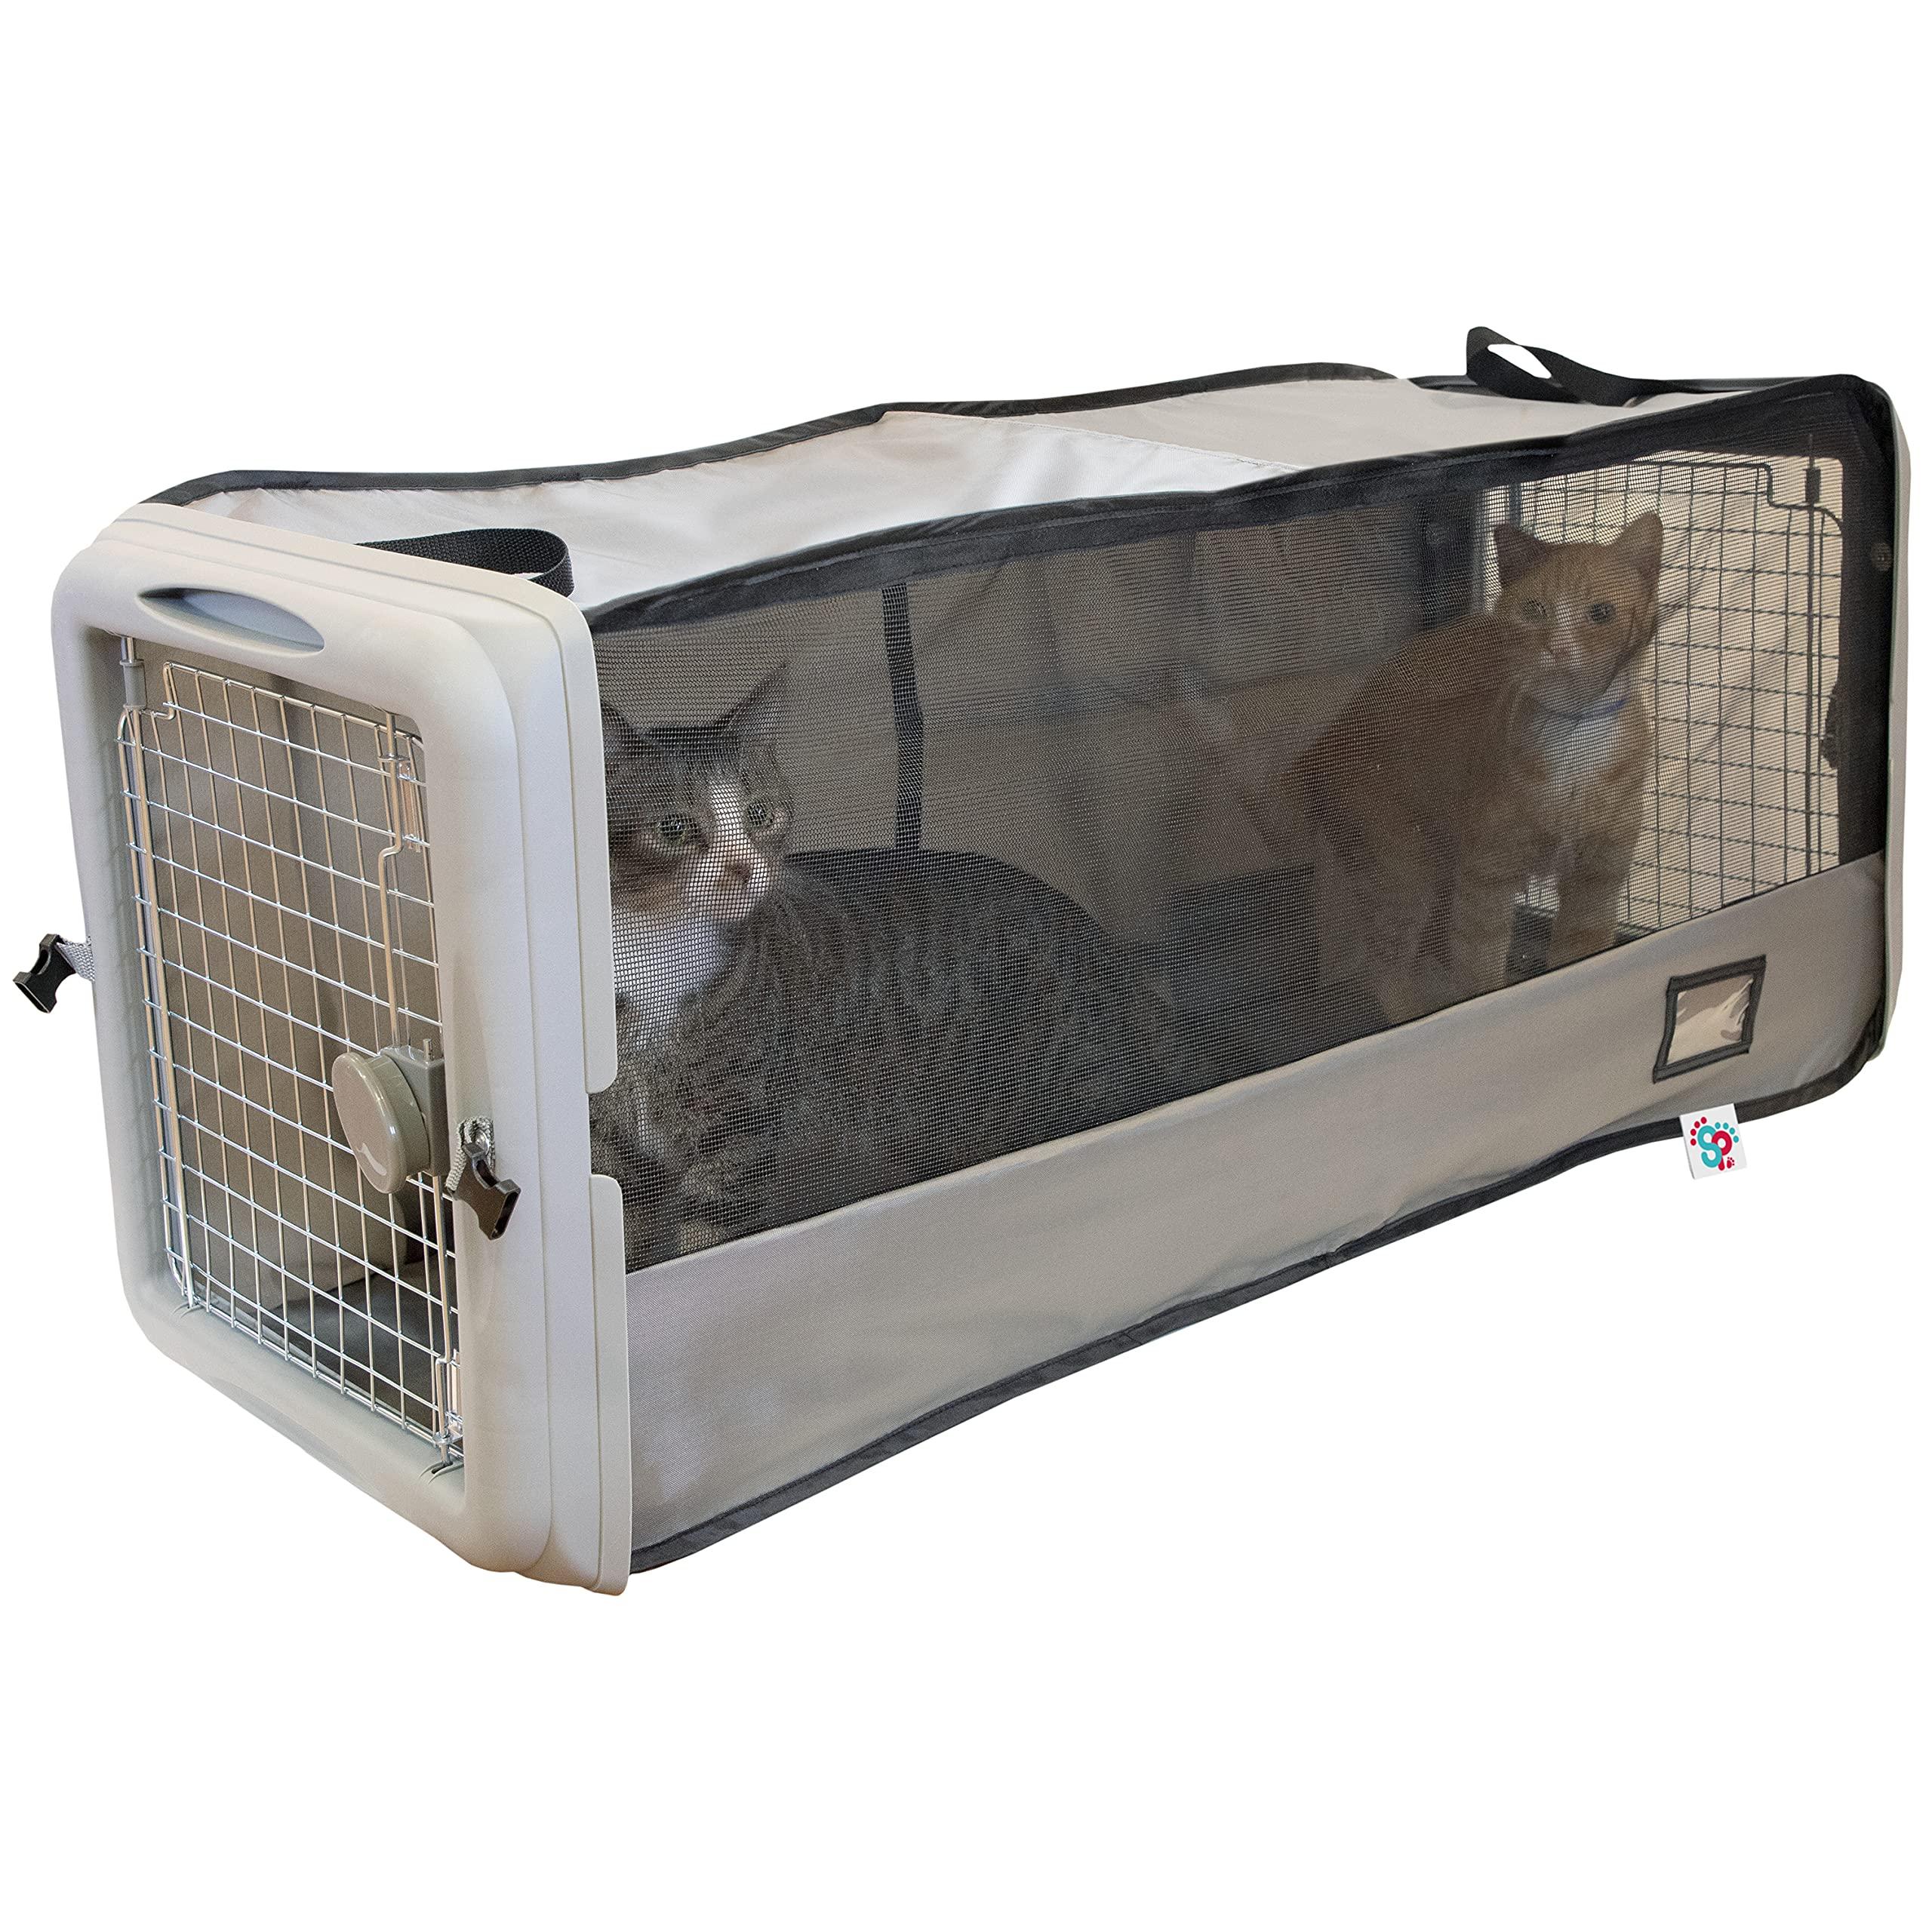 SPORT PET Large Pop Open Kennel, Portable Cat Cage Kennel, Waterproof Pet bed, Travel Litter Collection